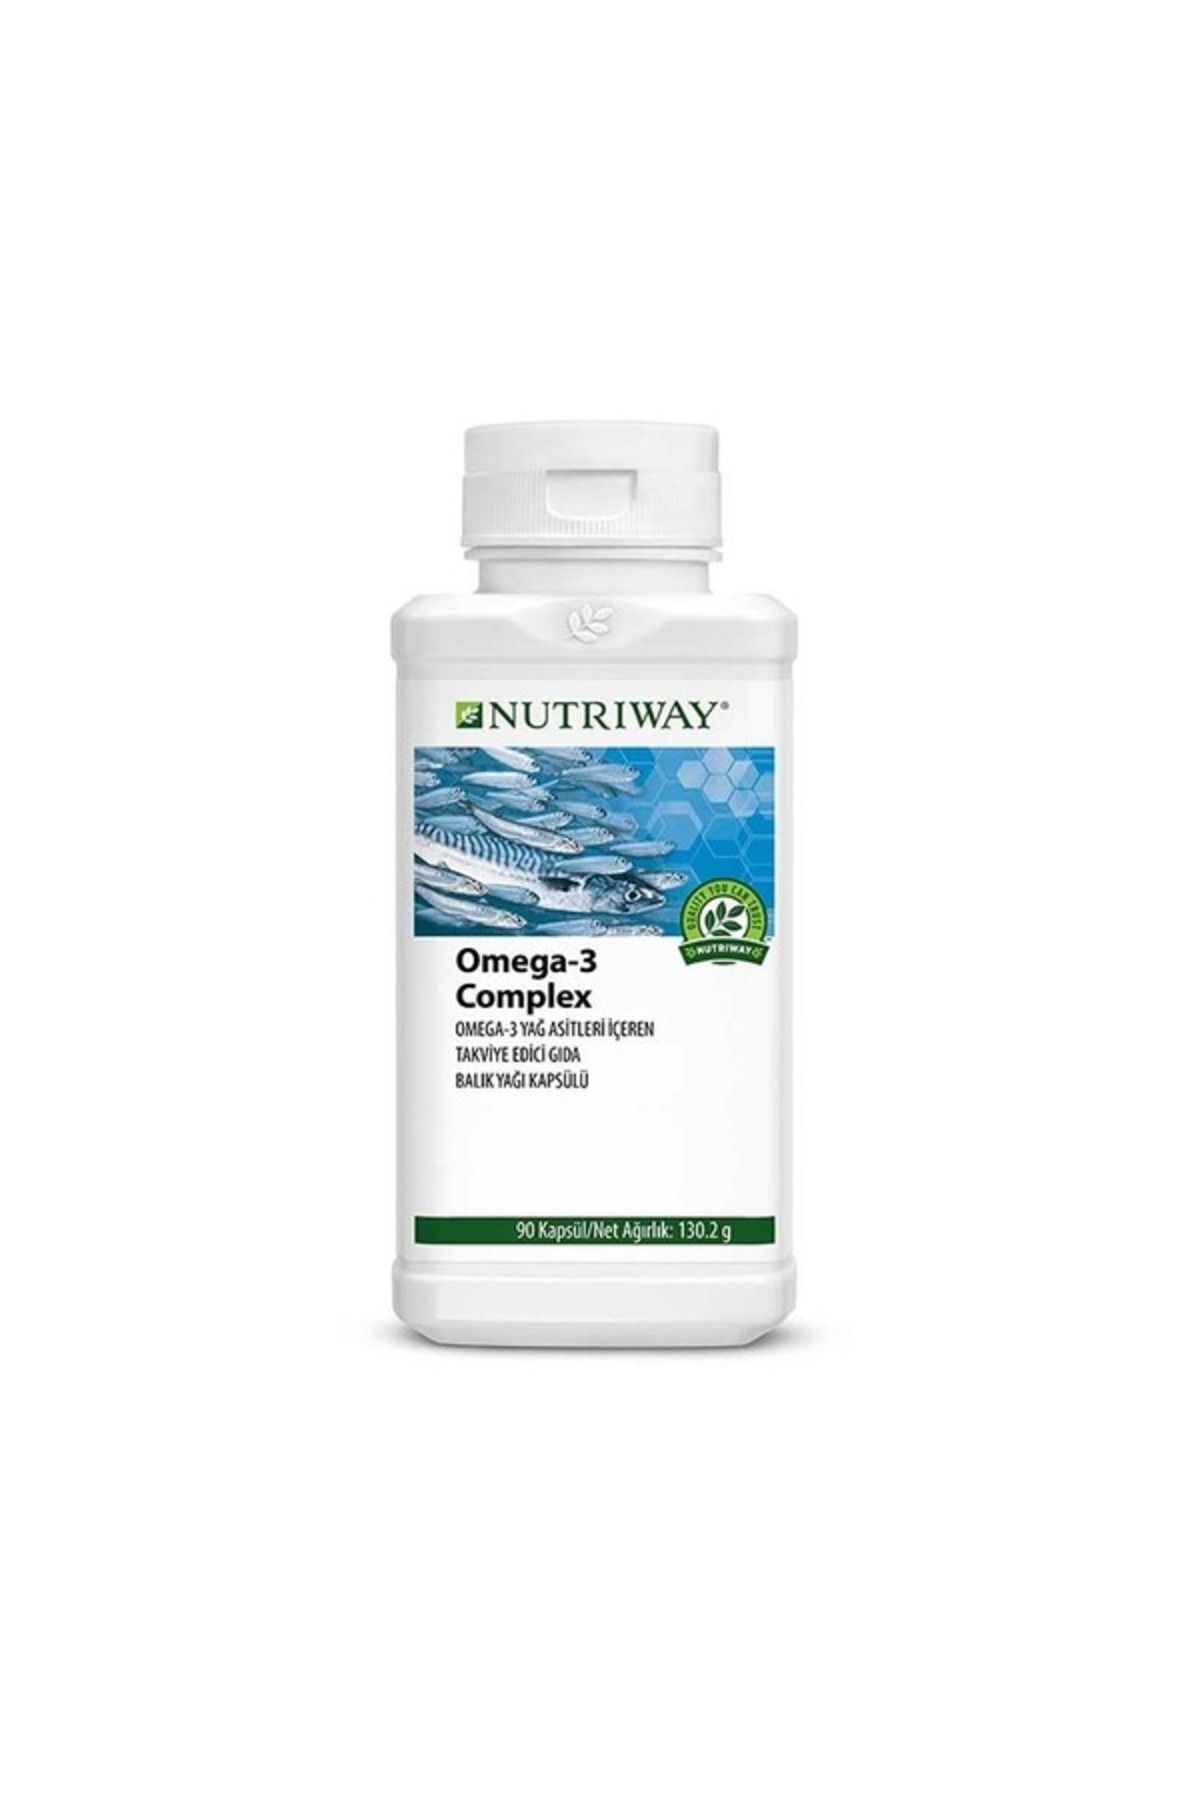 Amway Omega 3 Complex Nutriway™